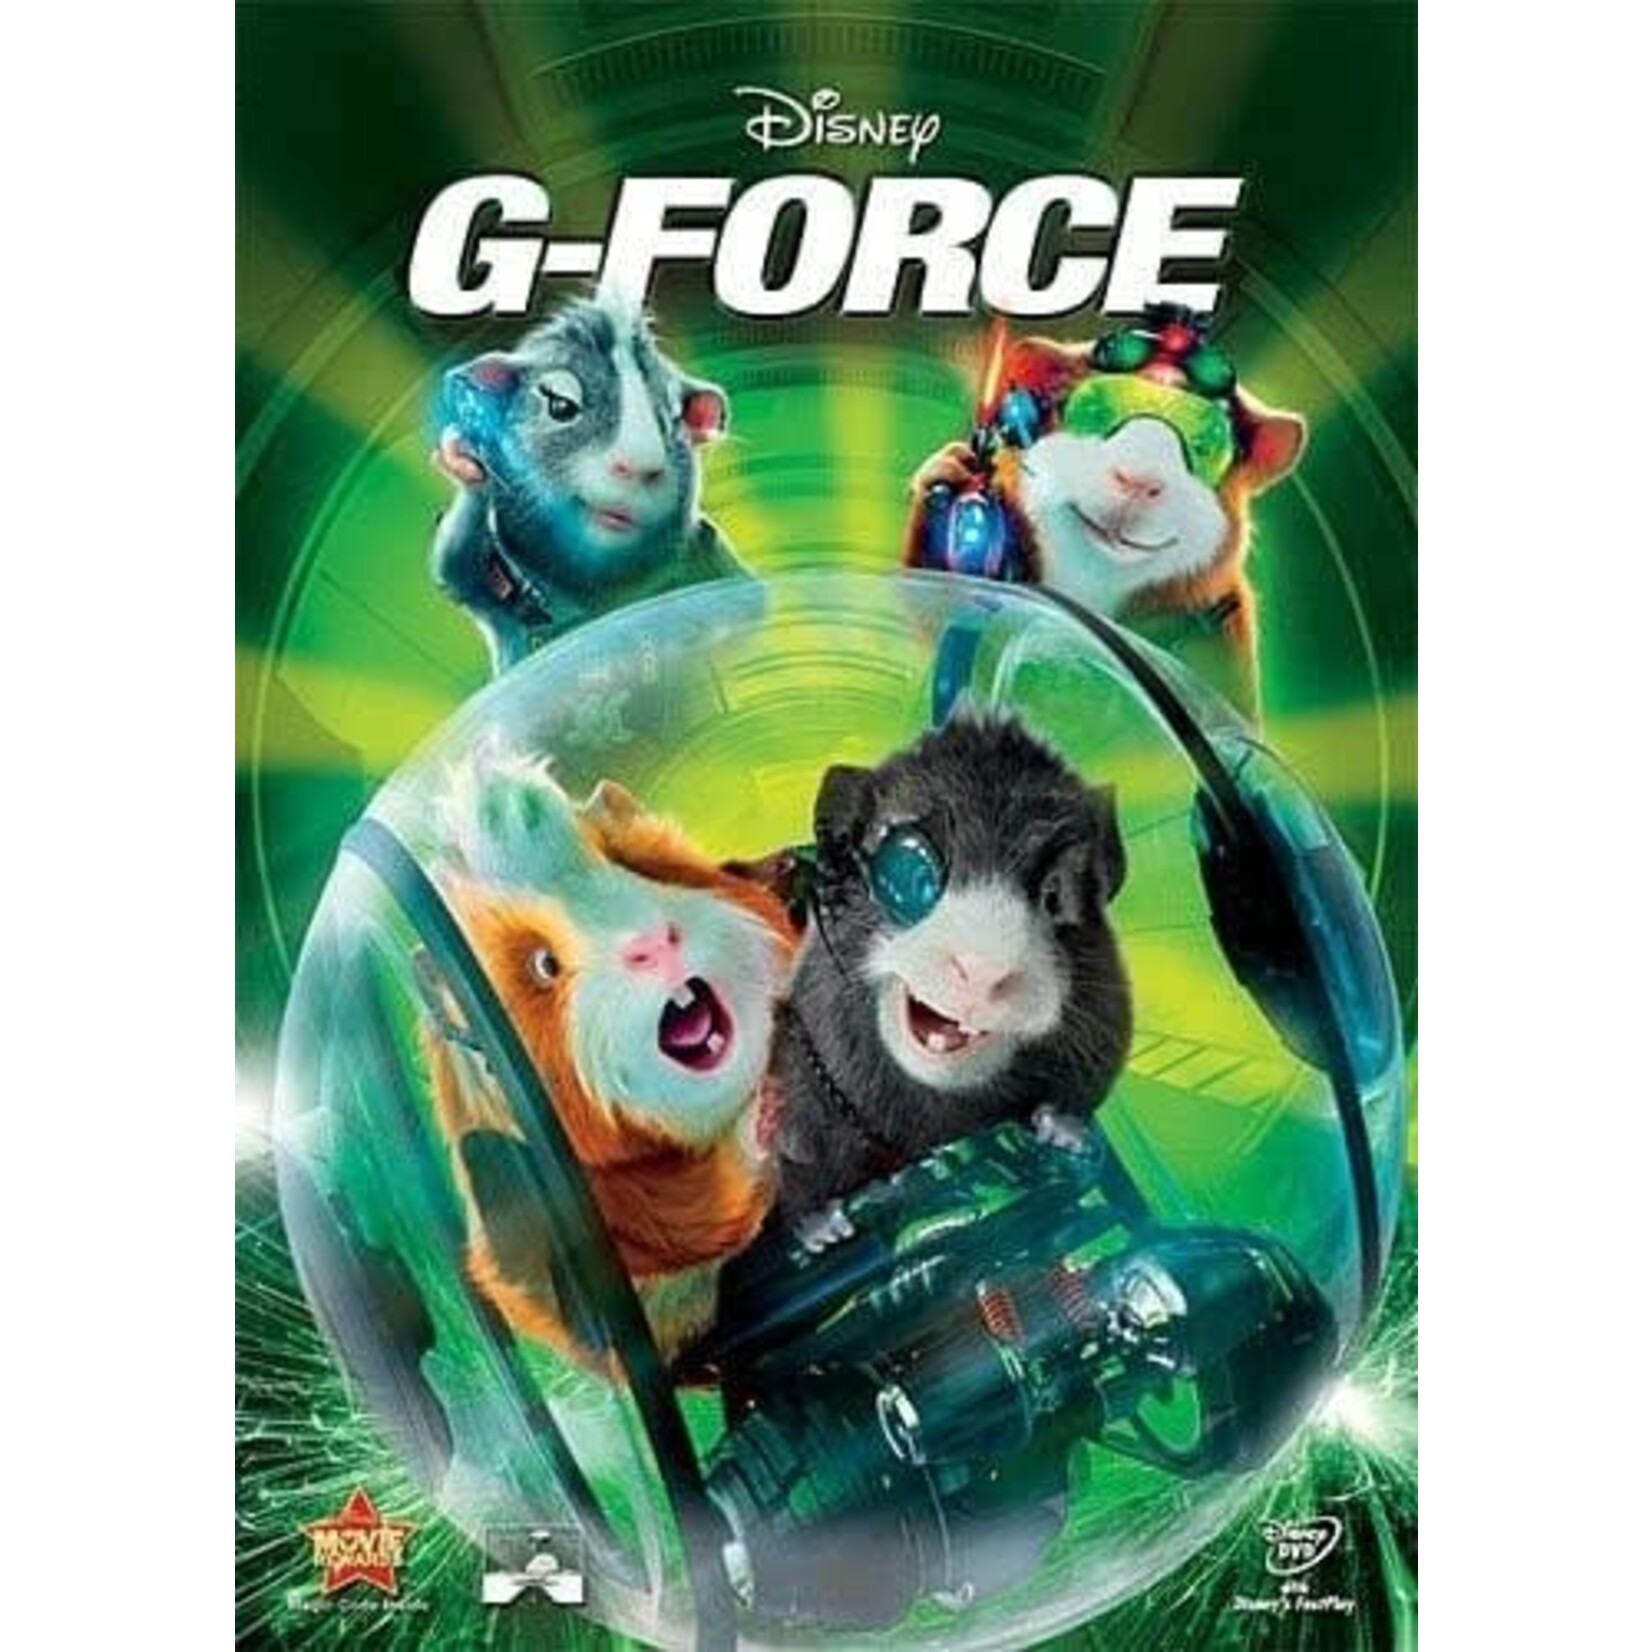 G-Force (2009) [USED DVD]